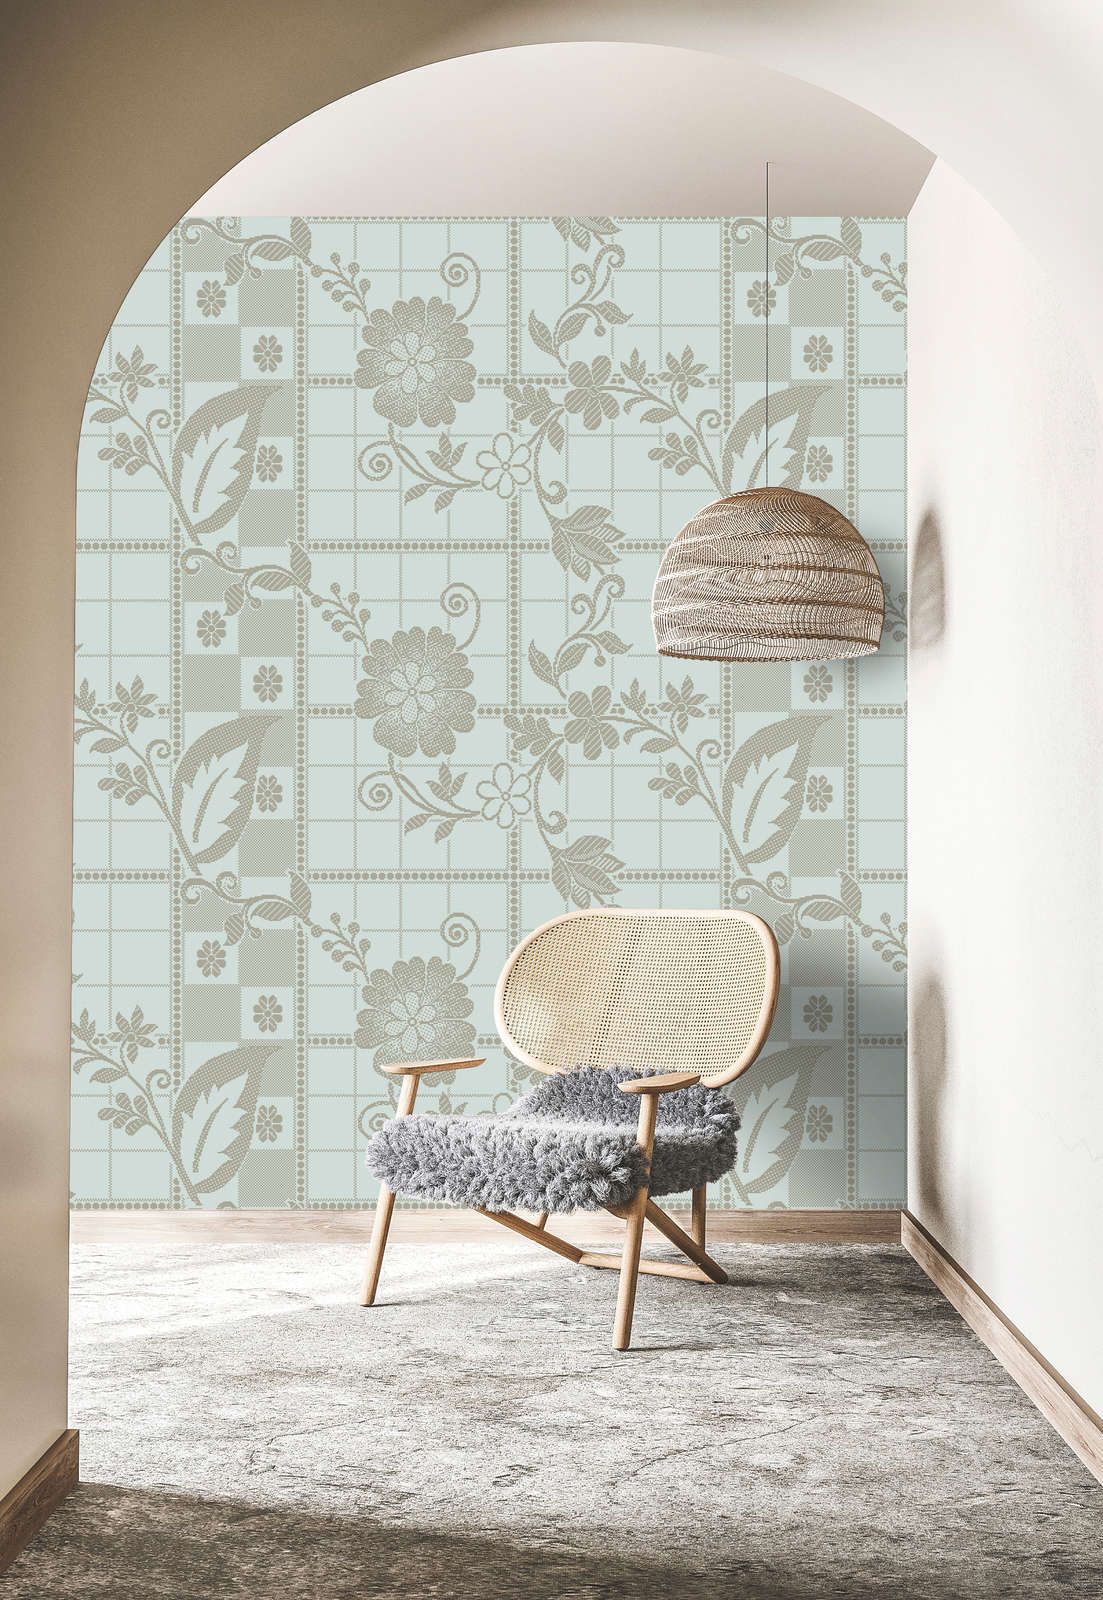             Photo wallpaper »valerie« - Small squares in pixel style with flowers - Light mint green | Smooth, slightly shiny premium non-woven fabric
        